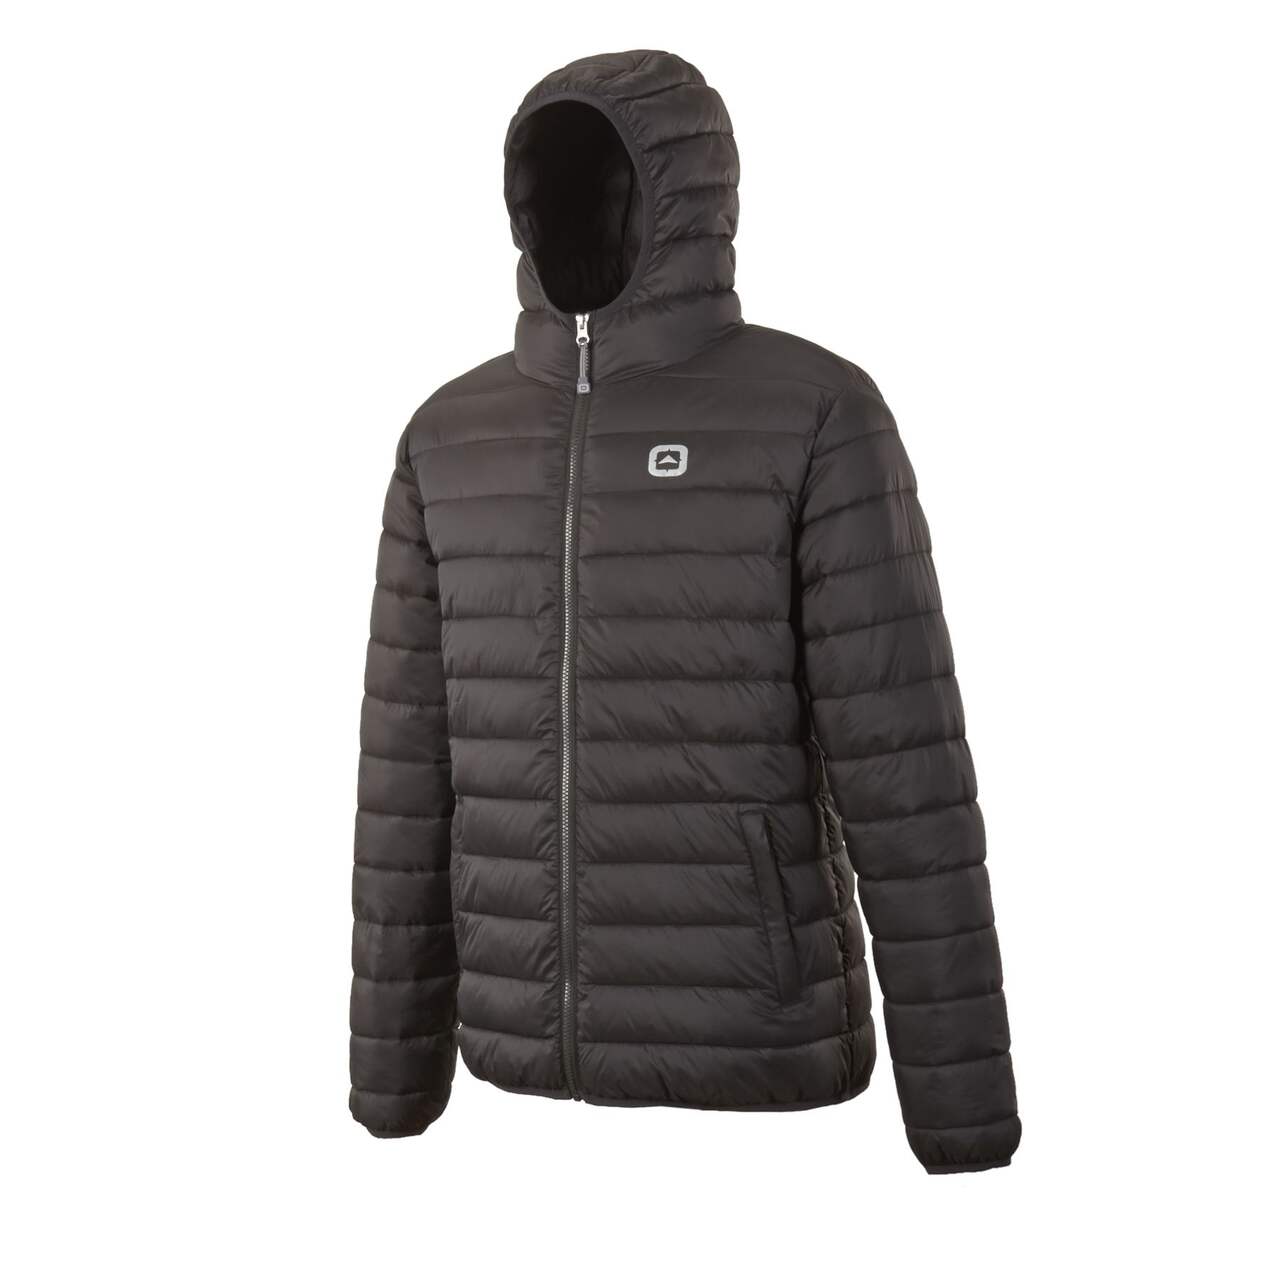 https://media-www.canadiantire.ca/product/playing/footwear-apparel/winter-footwear-apparel/1871354/outbound-men-s-noah-puffy-jacket-charcoal-m-23bb9987-7297-4018-bce7-c2ca6c9d6ec8-jpgrendition.jpg?imdensity=1&imwidth=1244&impolicy=mZoom